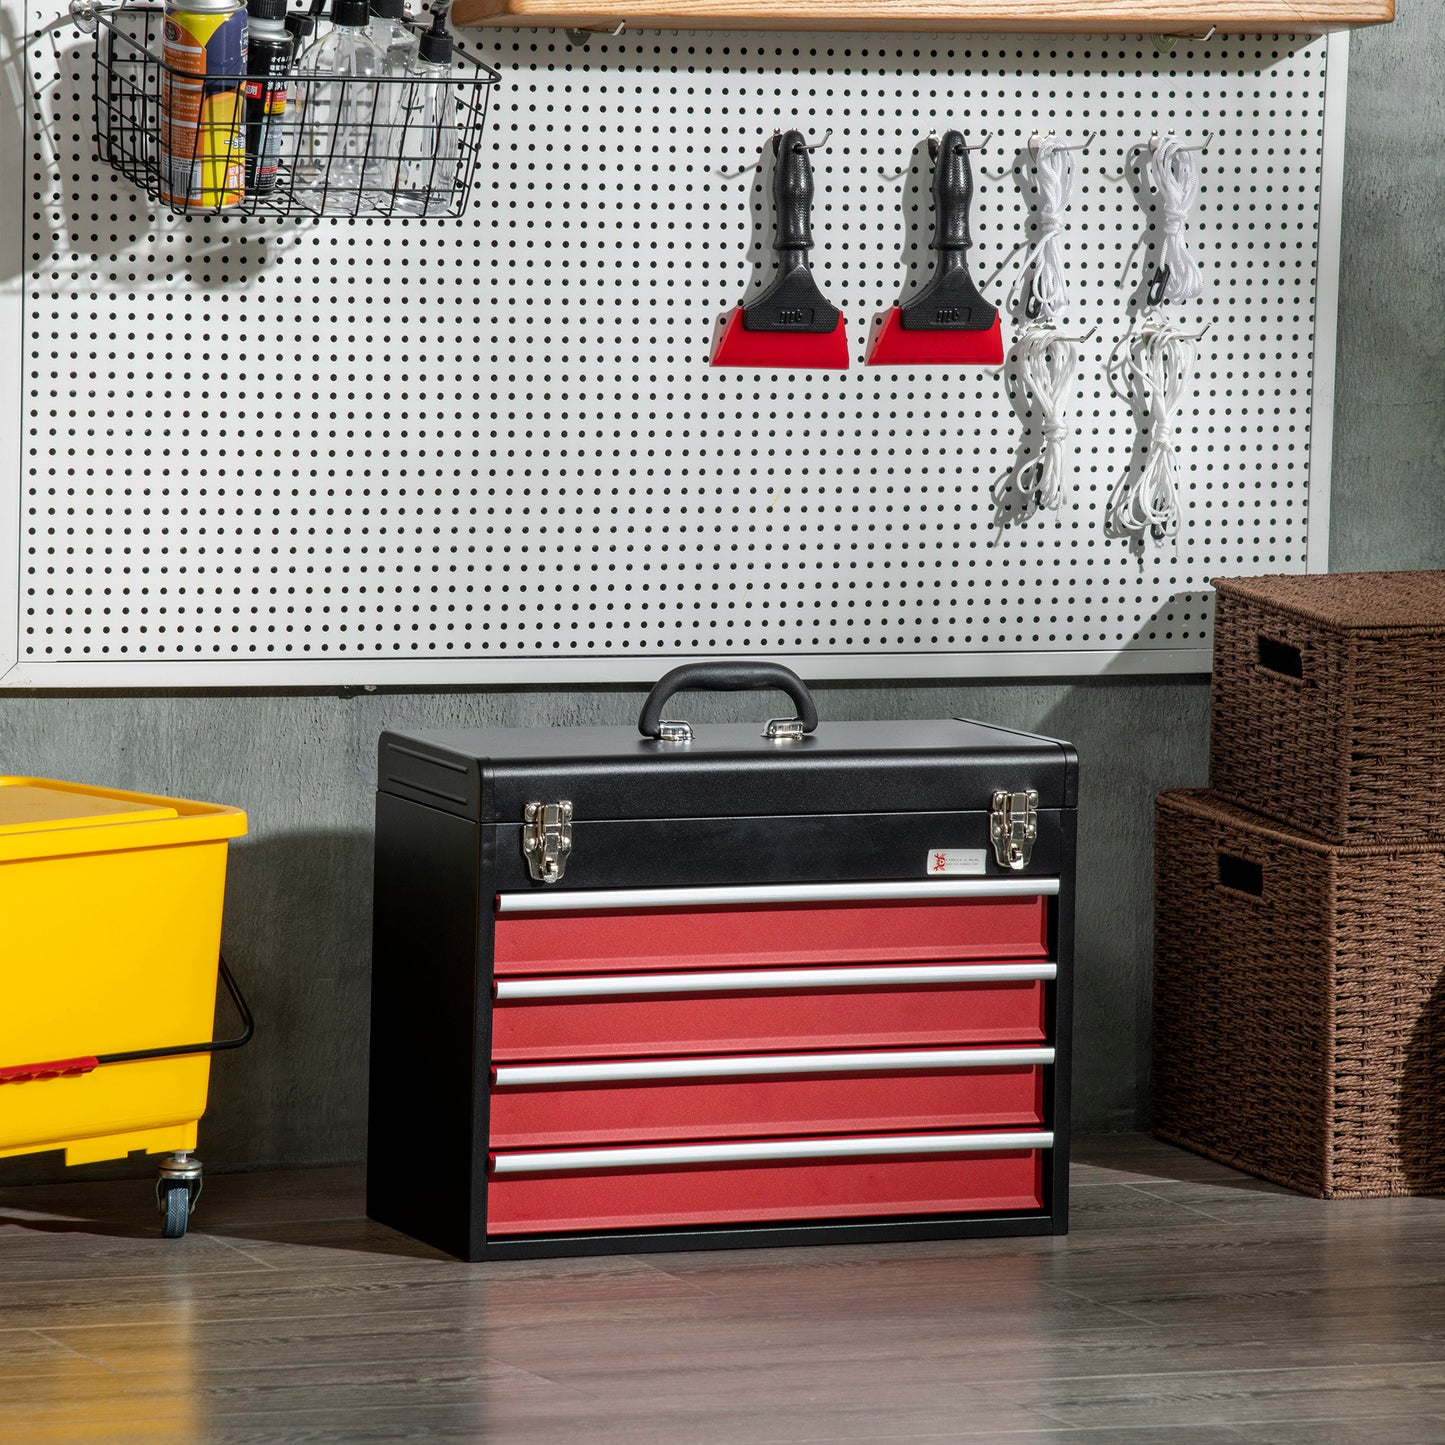 DURHAND 4 Drawer Tool Chest, Lockable Metal Tool Box with Ball Bearing Runners, Portable Toolbox, 510mm x 220mm x 395mm